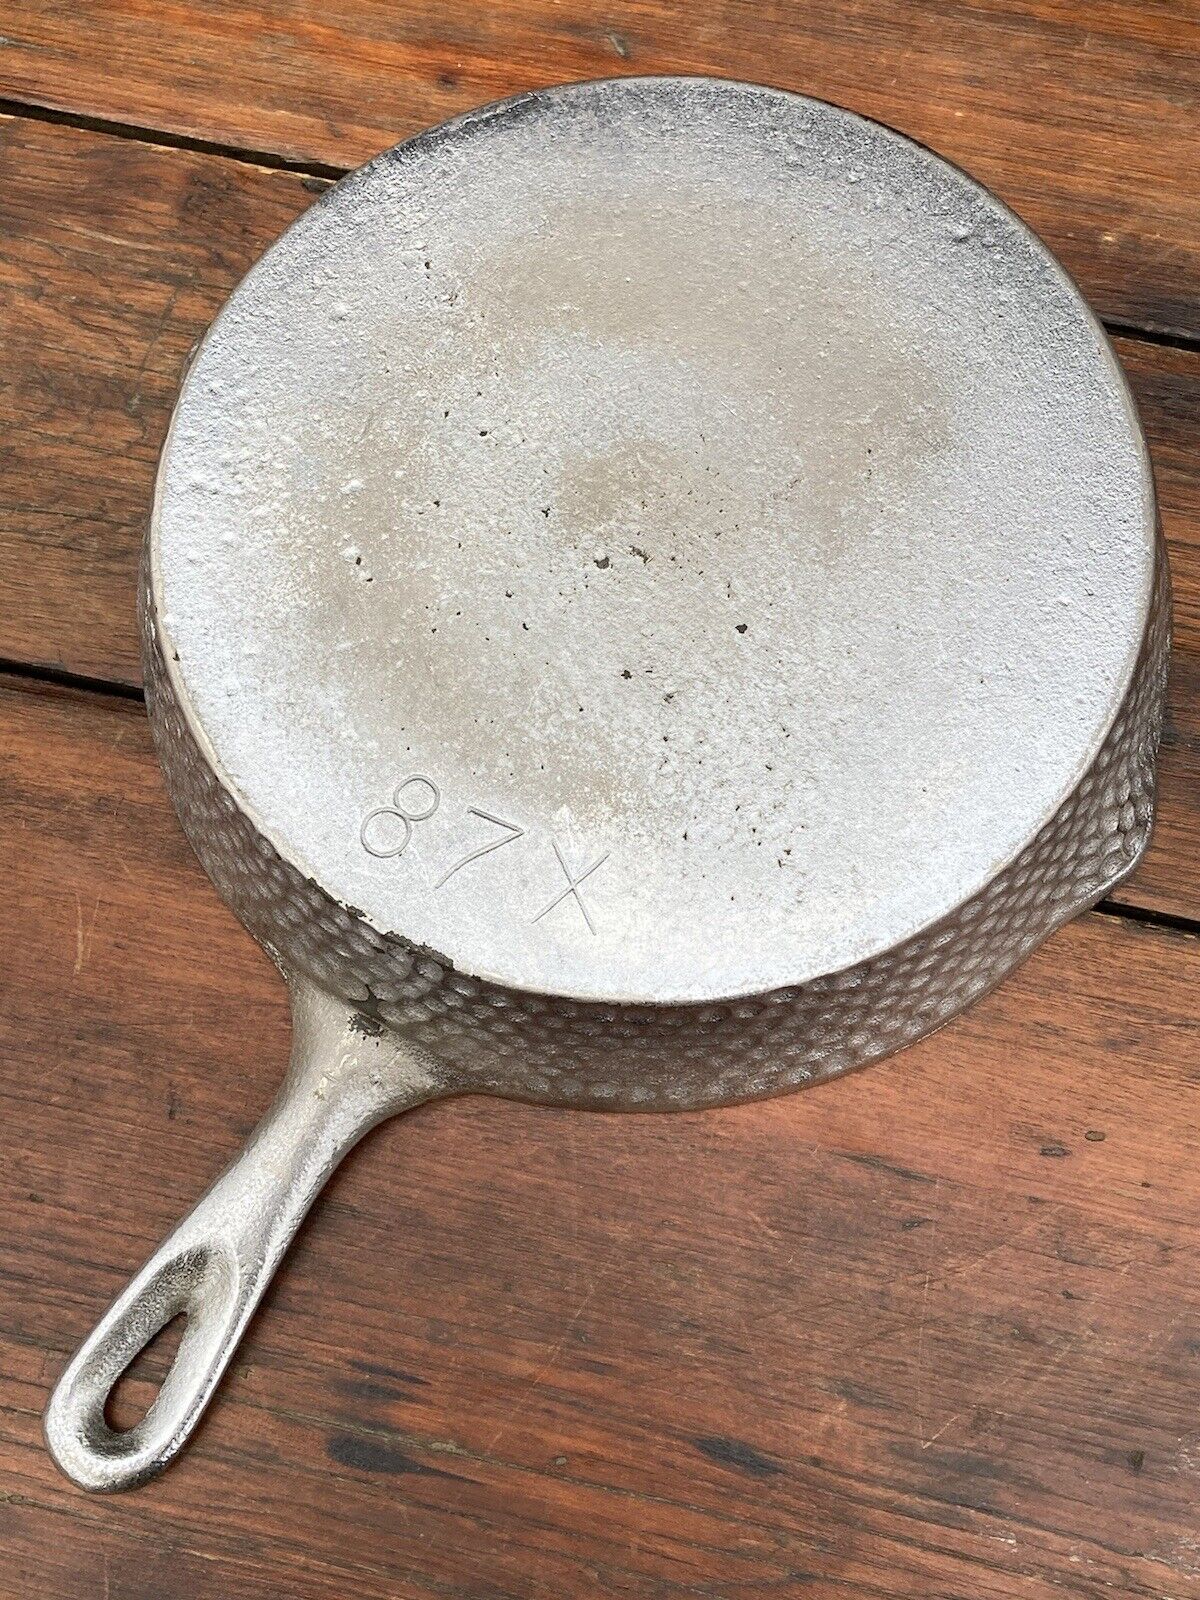 Chicago Foundry Hardware #8 Hammered Cast Iron Skillet with Chrome Finish